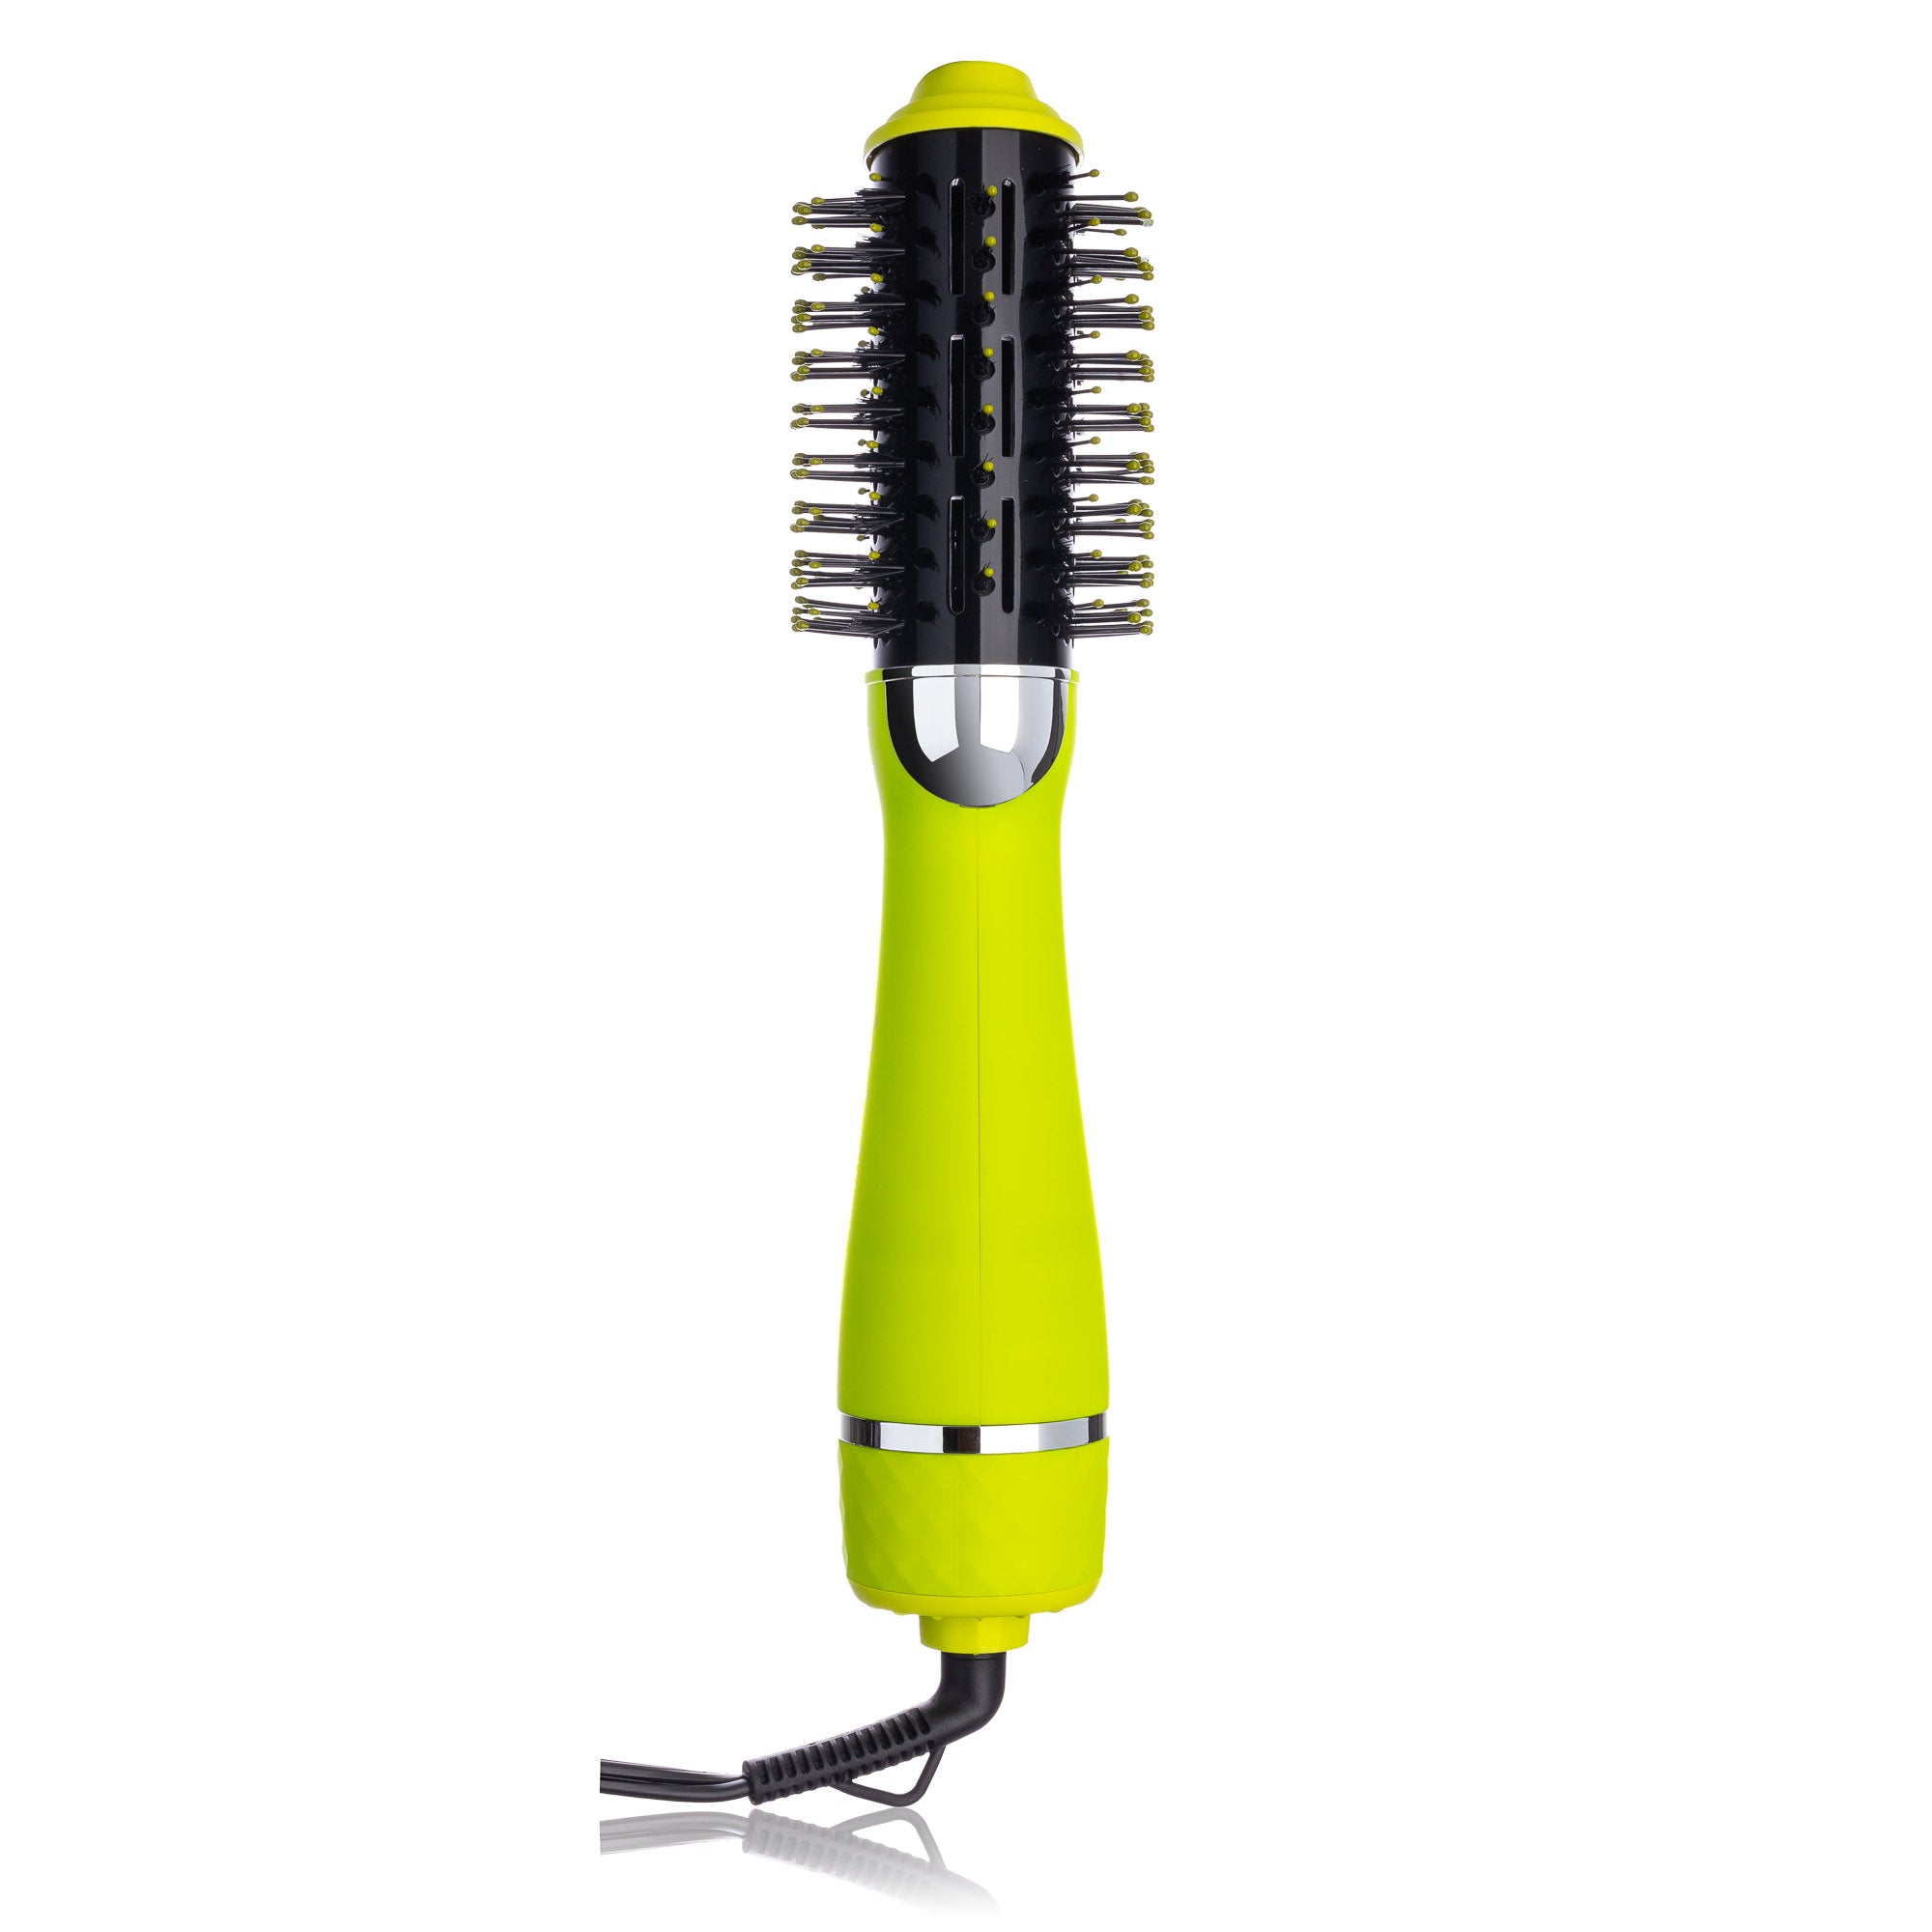 New 3in1 Blowout Brush Styling Tool - California Collection/Yellow